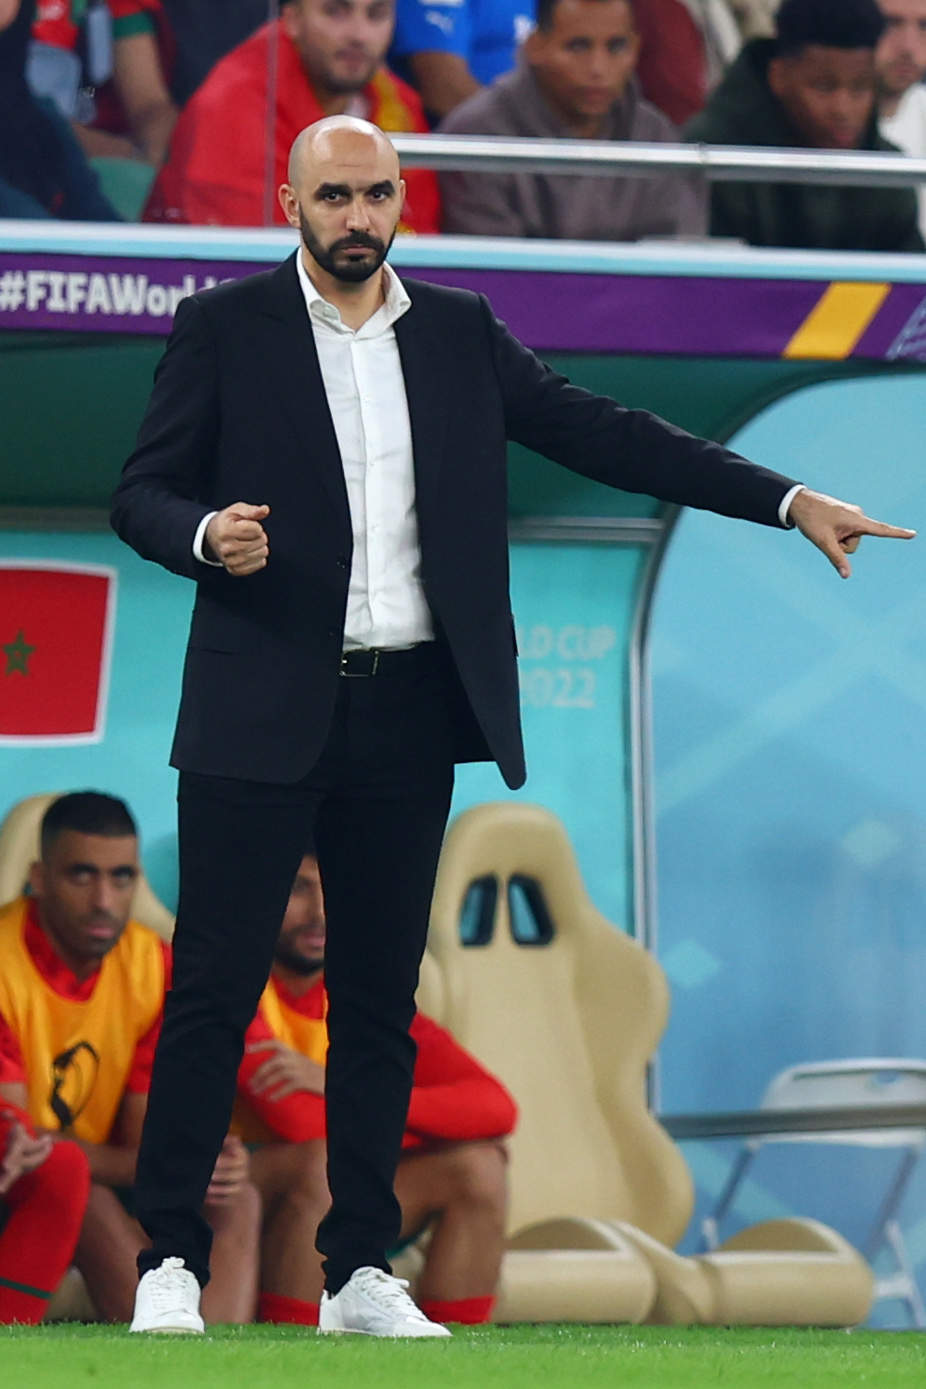 10 December 2022, Qatar, Doha: Morocco's coach Walid Regragui gestures on the sidelines during the FIFA World Cup Qatar 2022 Quarter-Final soccer match between Morocco and Portugal at Al-Thumama stadium. Photo: Tom Weller/dpa